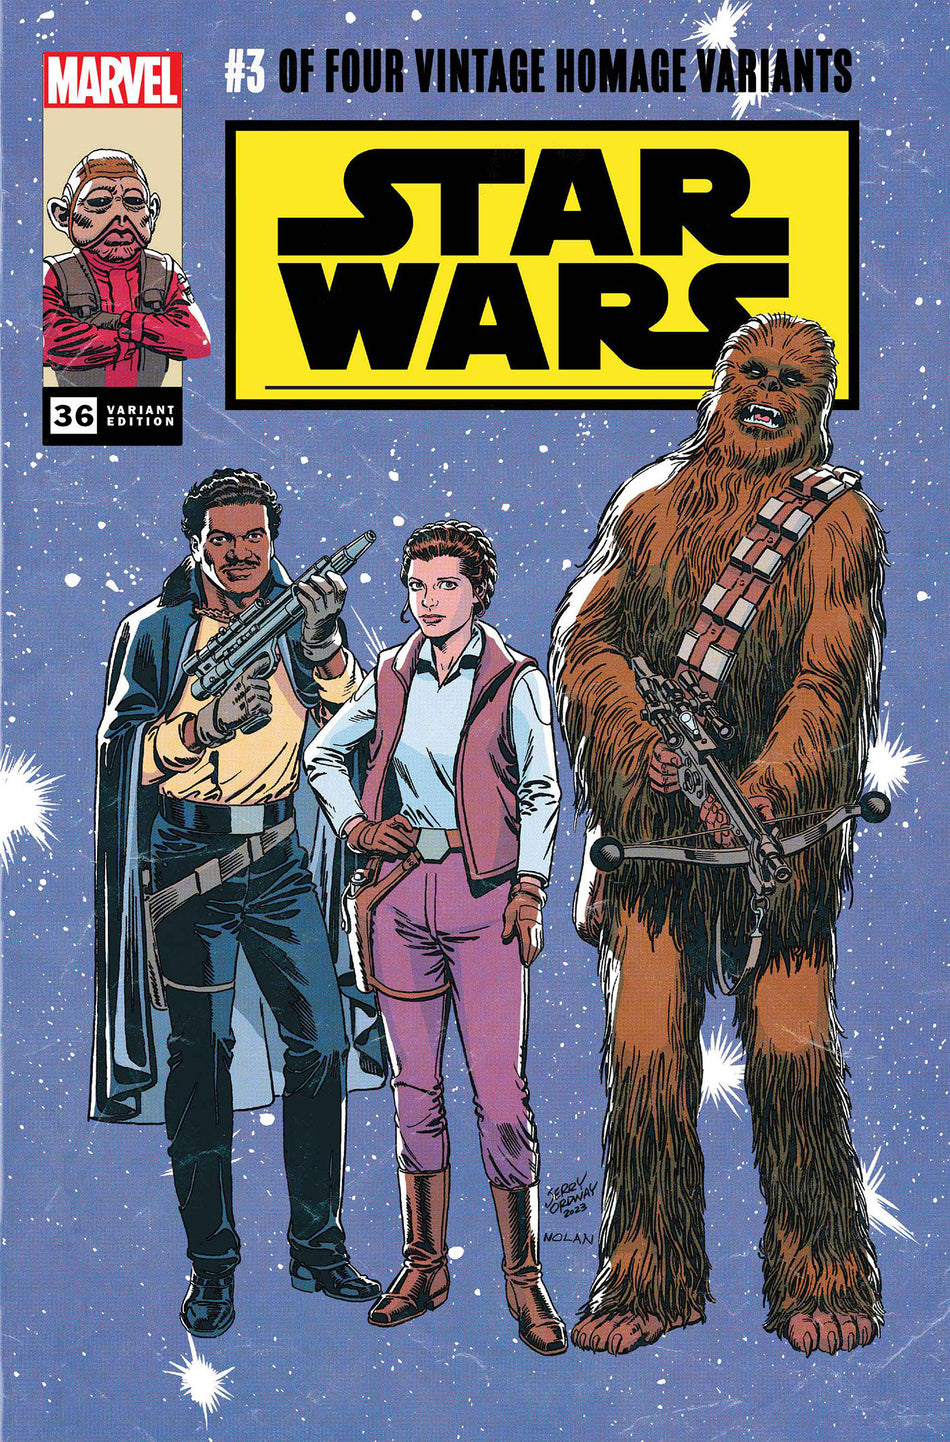 Stock photo of Star Wars 36 Jerry Ordway Classic Trade Dress Variant comic sold by Stronghold Collectibles